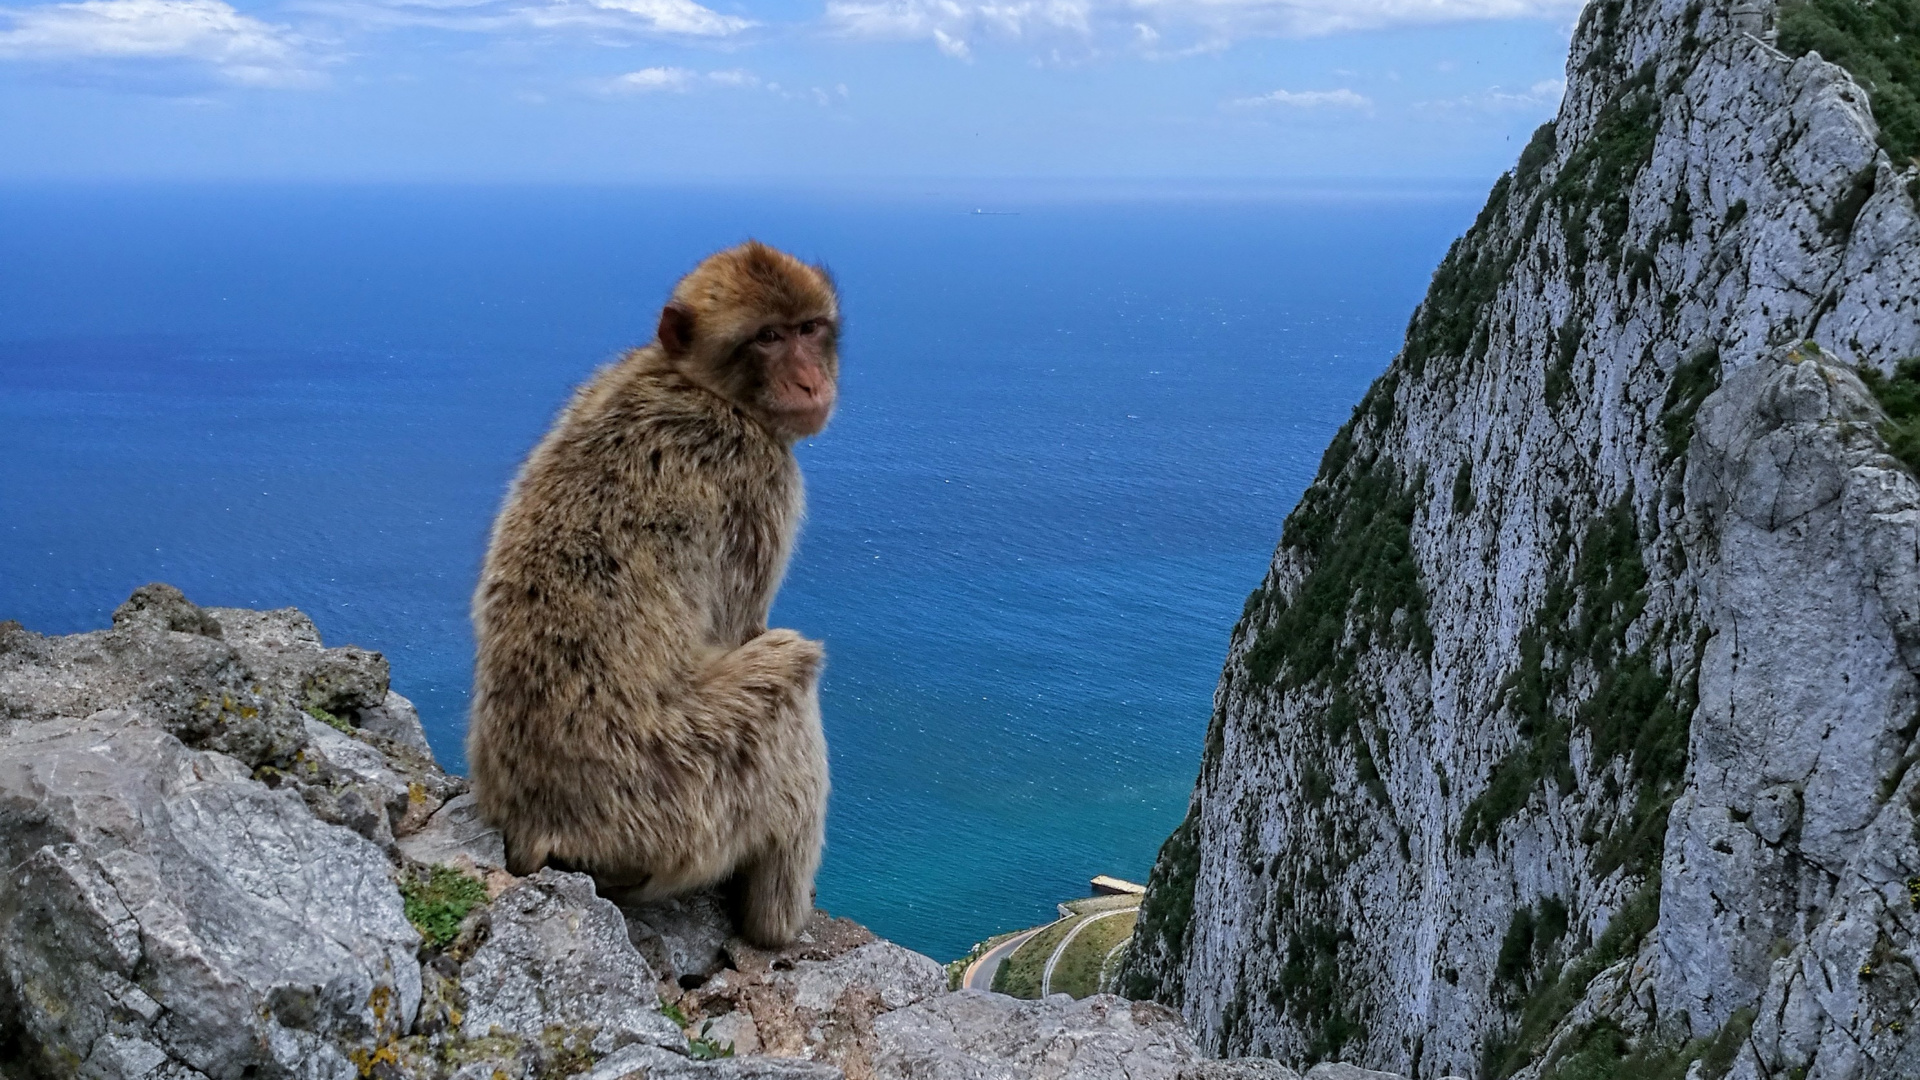 Brown Monkey Sitting on Gray Rock During Daytime. Wallpaper in 1920x1080 Resolution